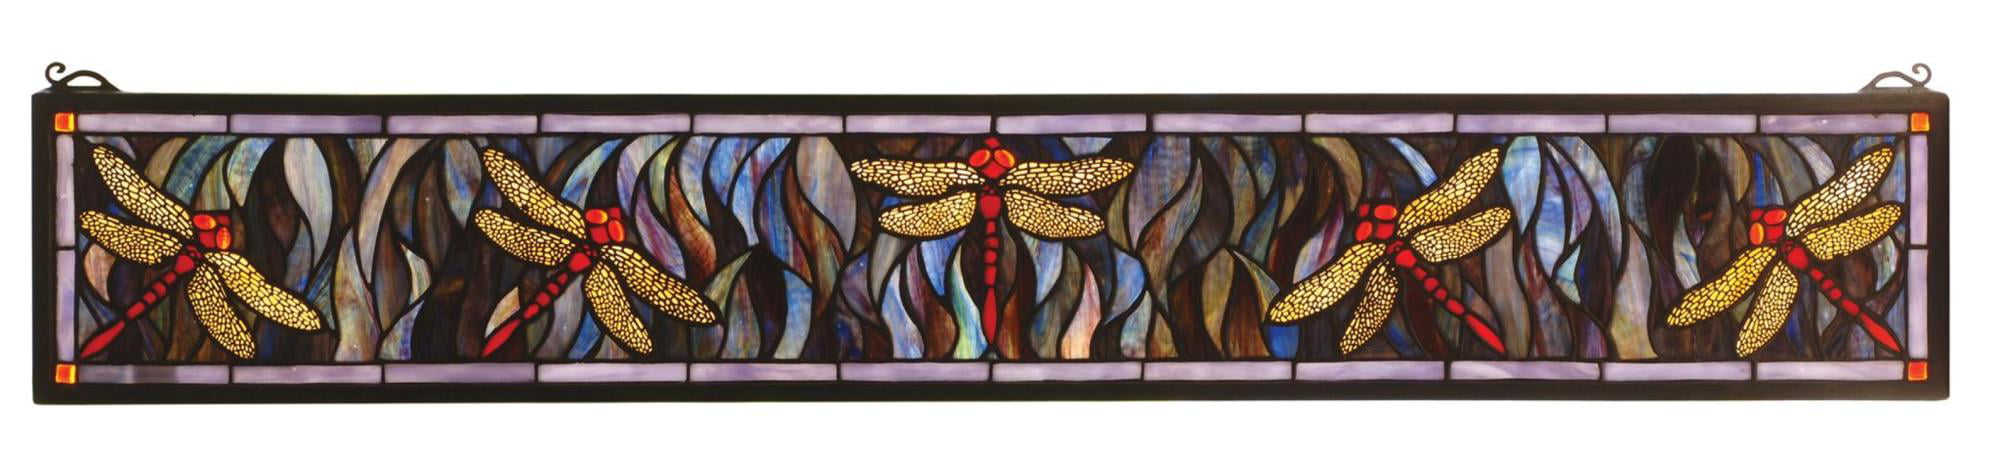 Meyda  72896 Stained Glass  Window From The Dragonflies Collection - 